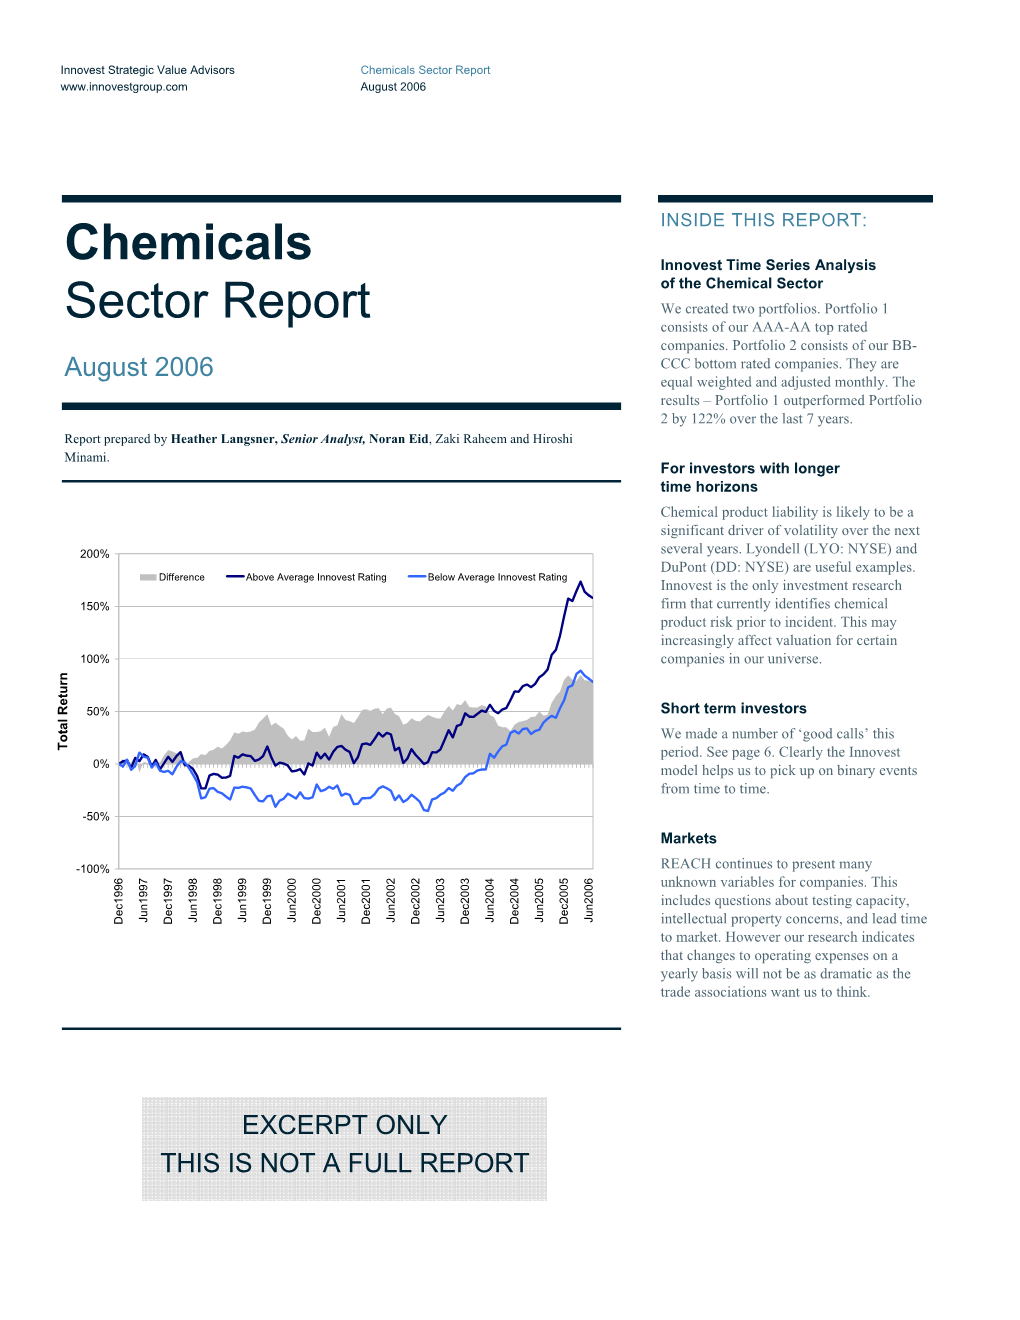 Chemicals Sector Report August 2006